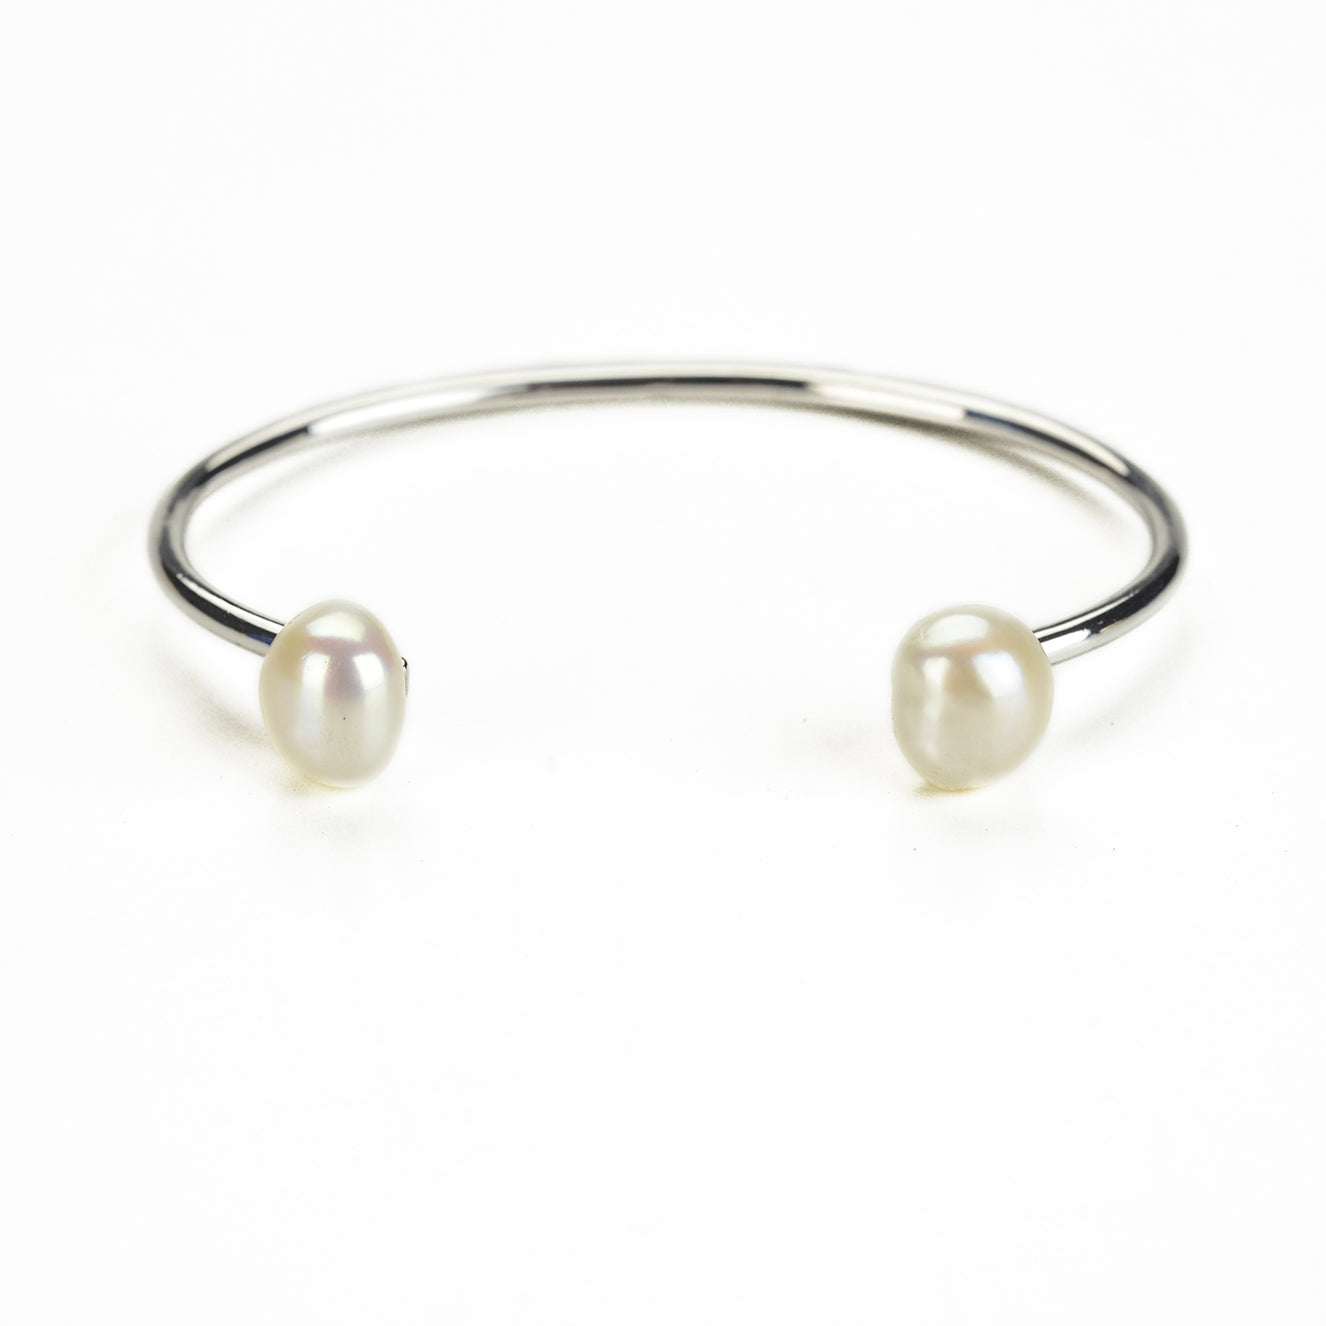 Open cuff bracelet in sterling silver and pearls